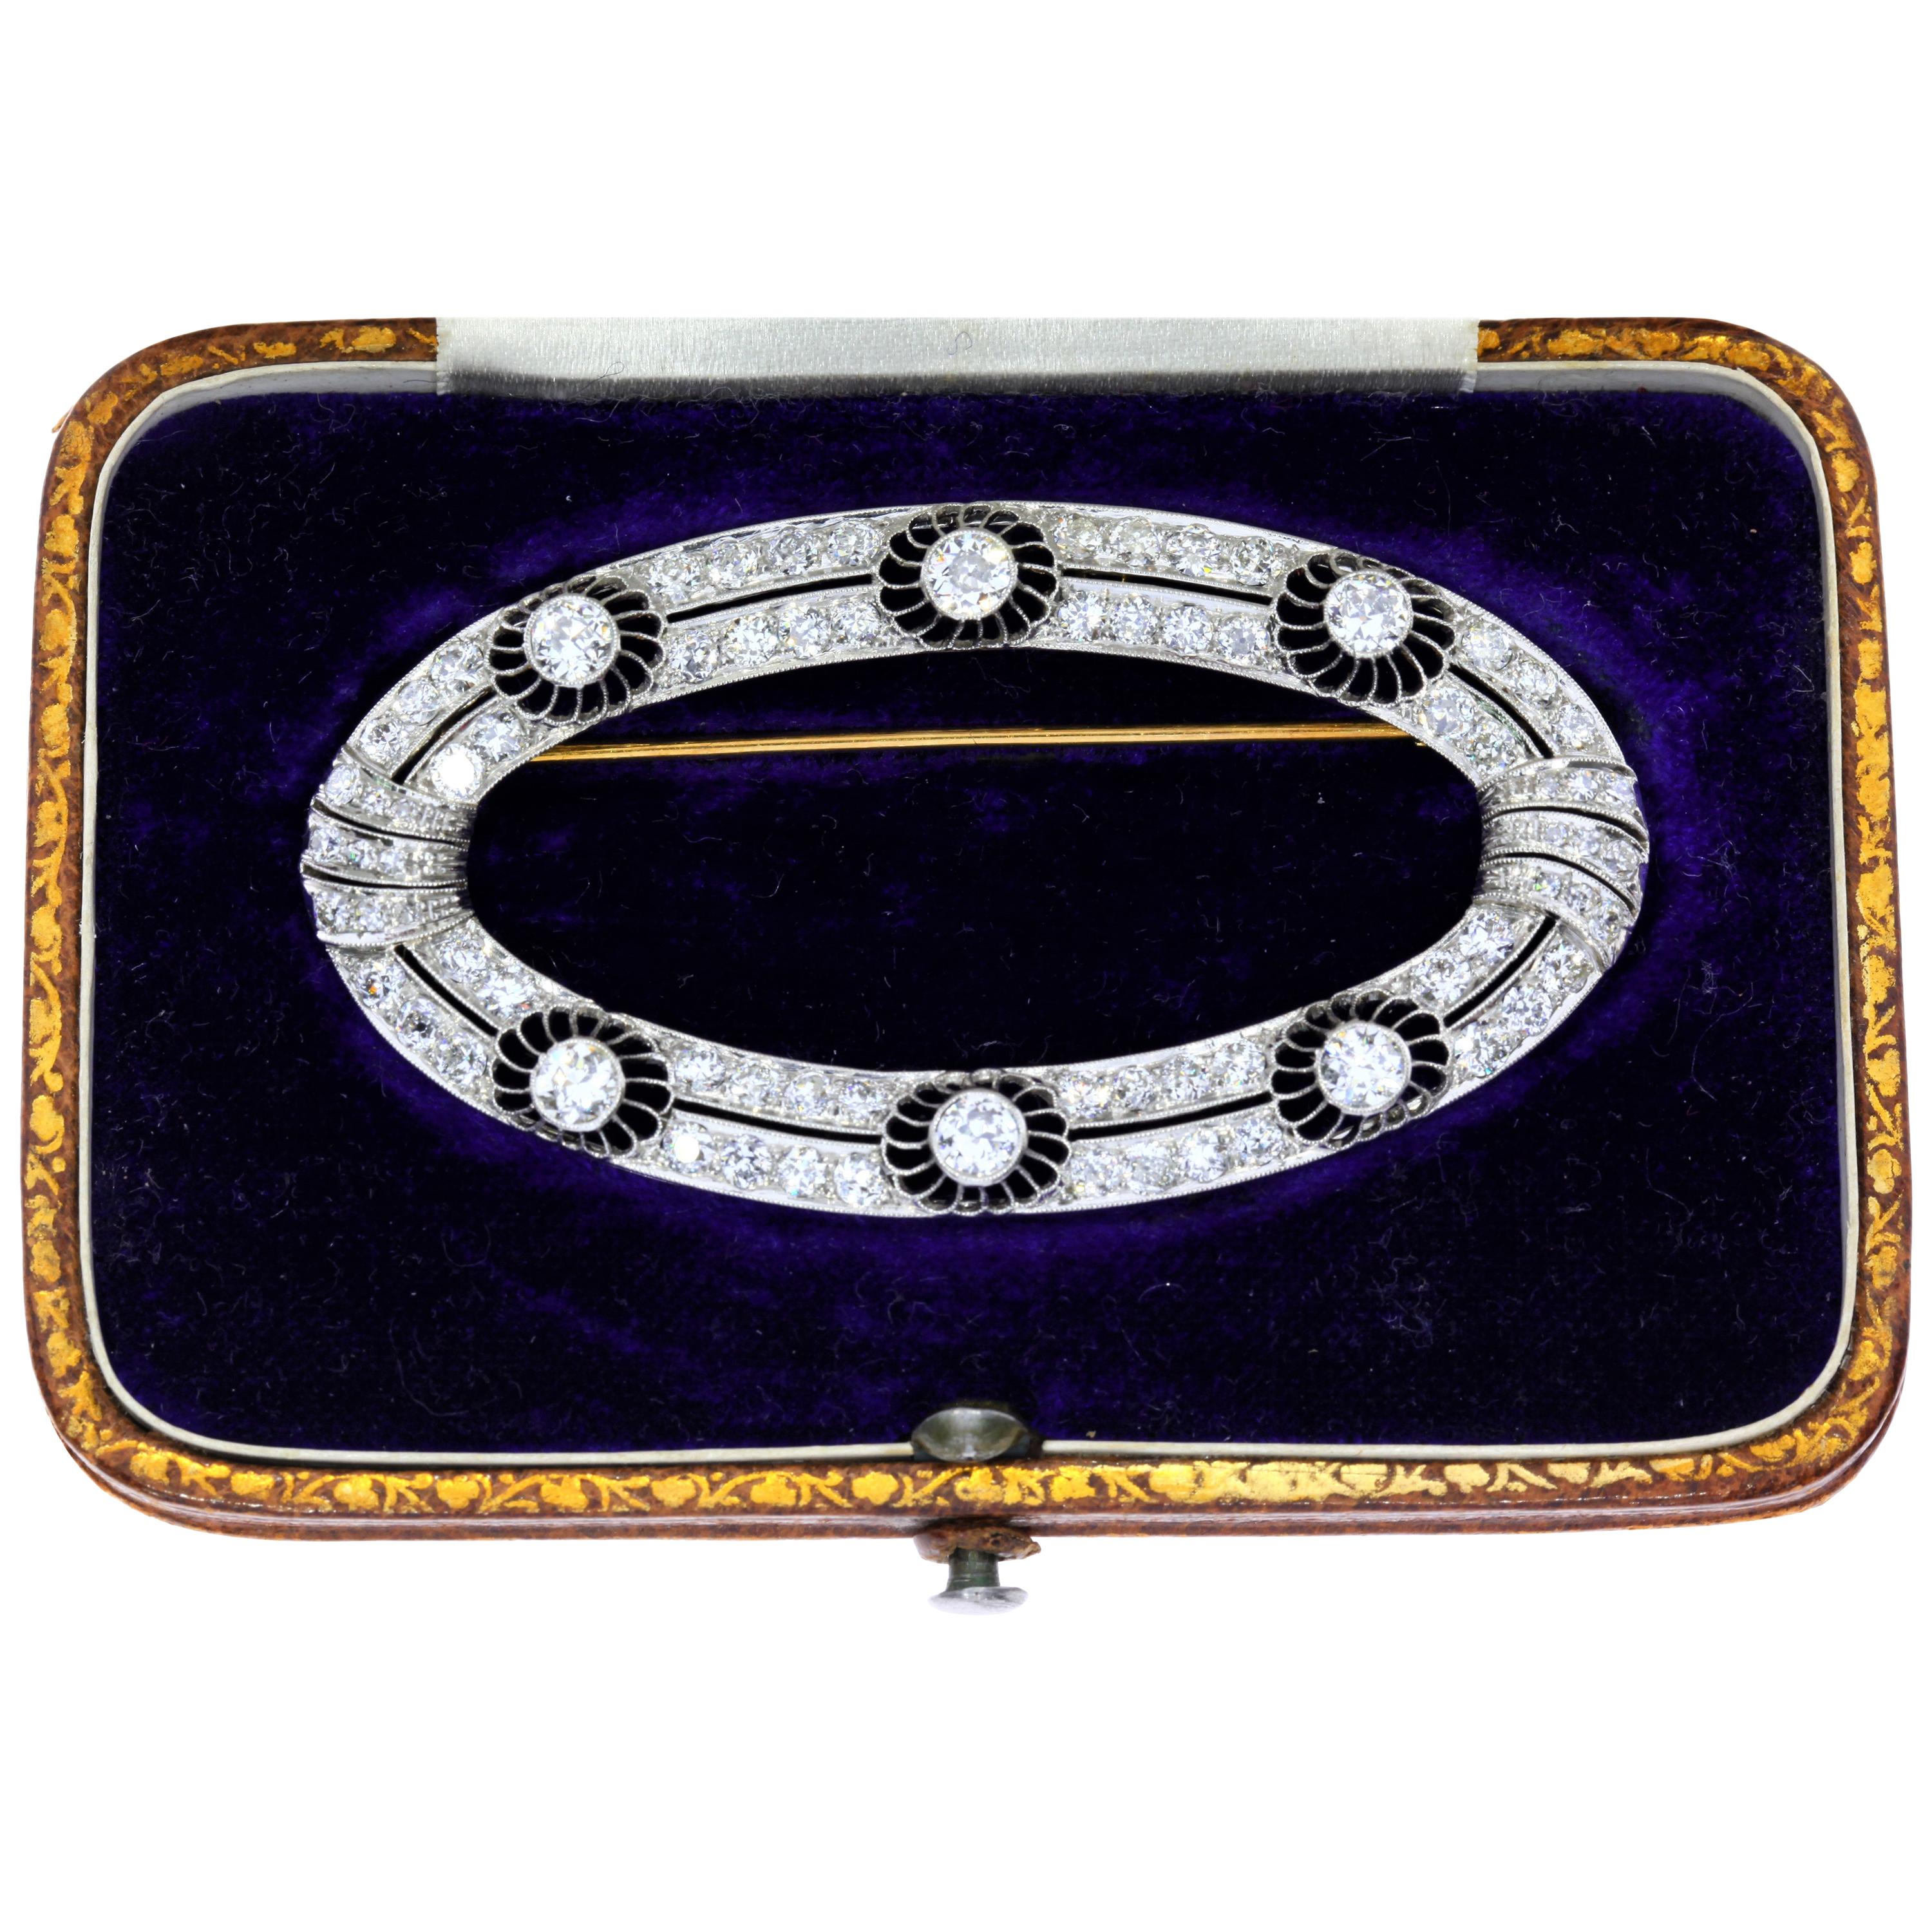 Oval Diamond Brooch with Openwork Design in Fitted Case For Sale